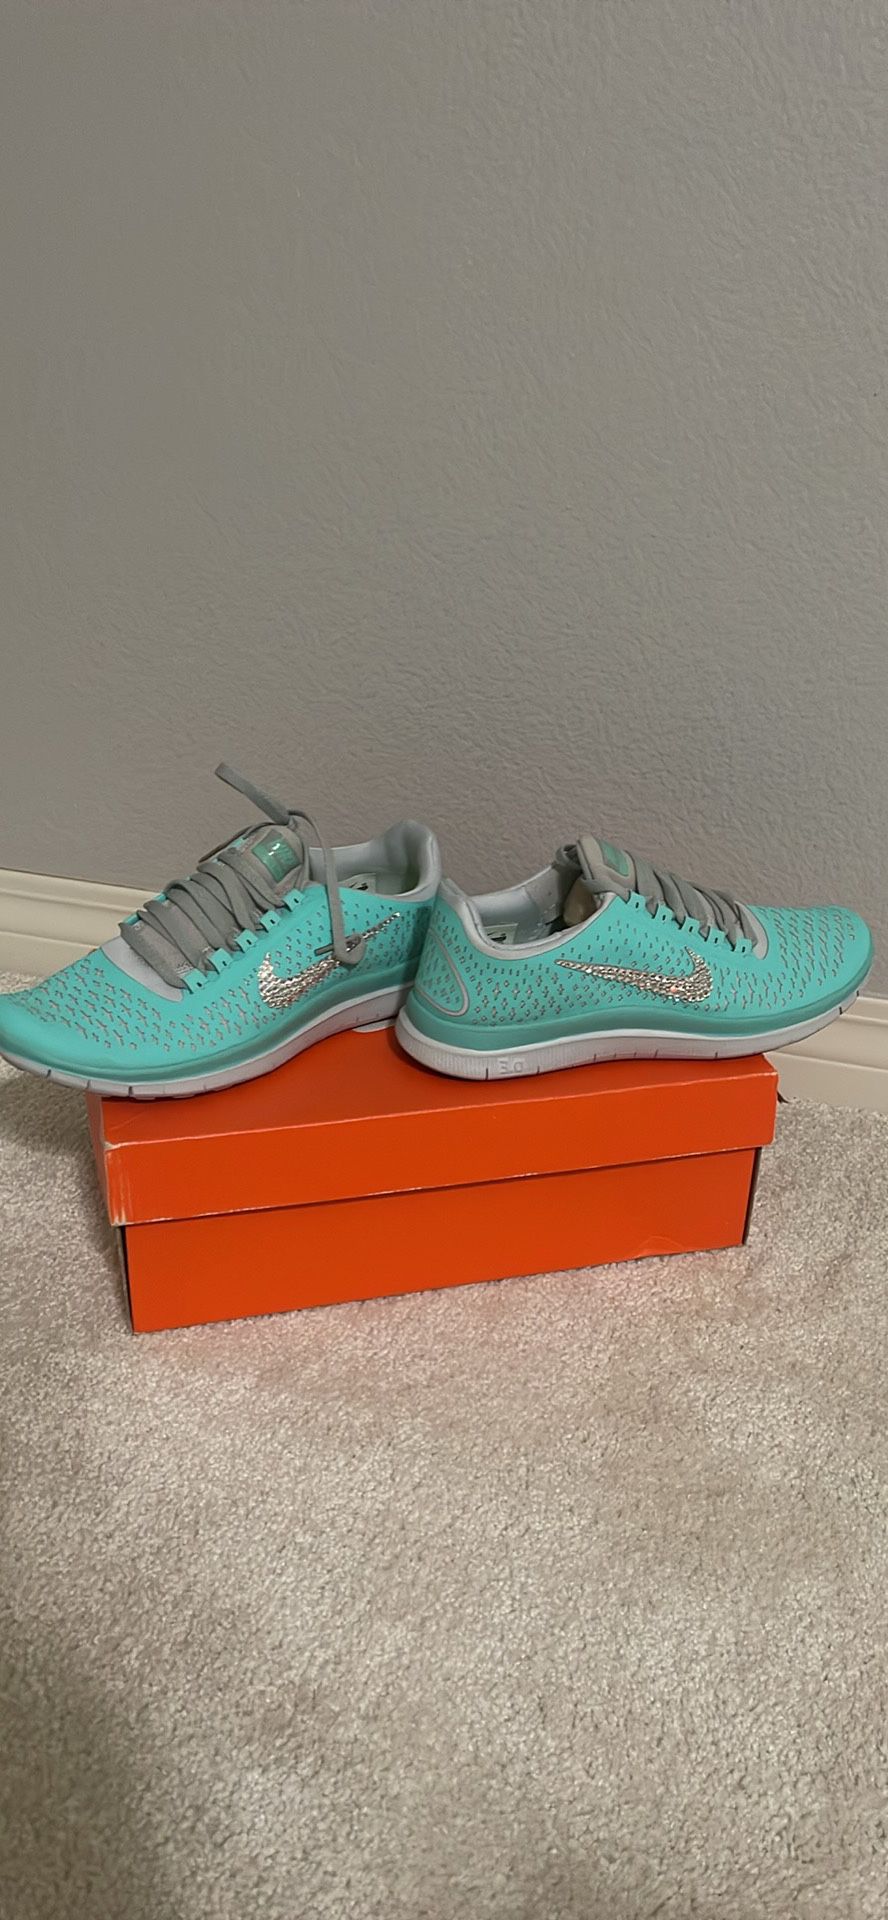 Nike – Women’s Shoes Brand New